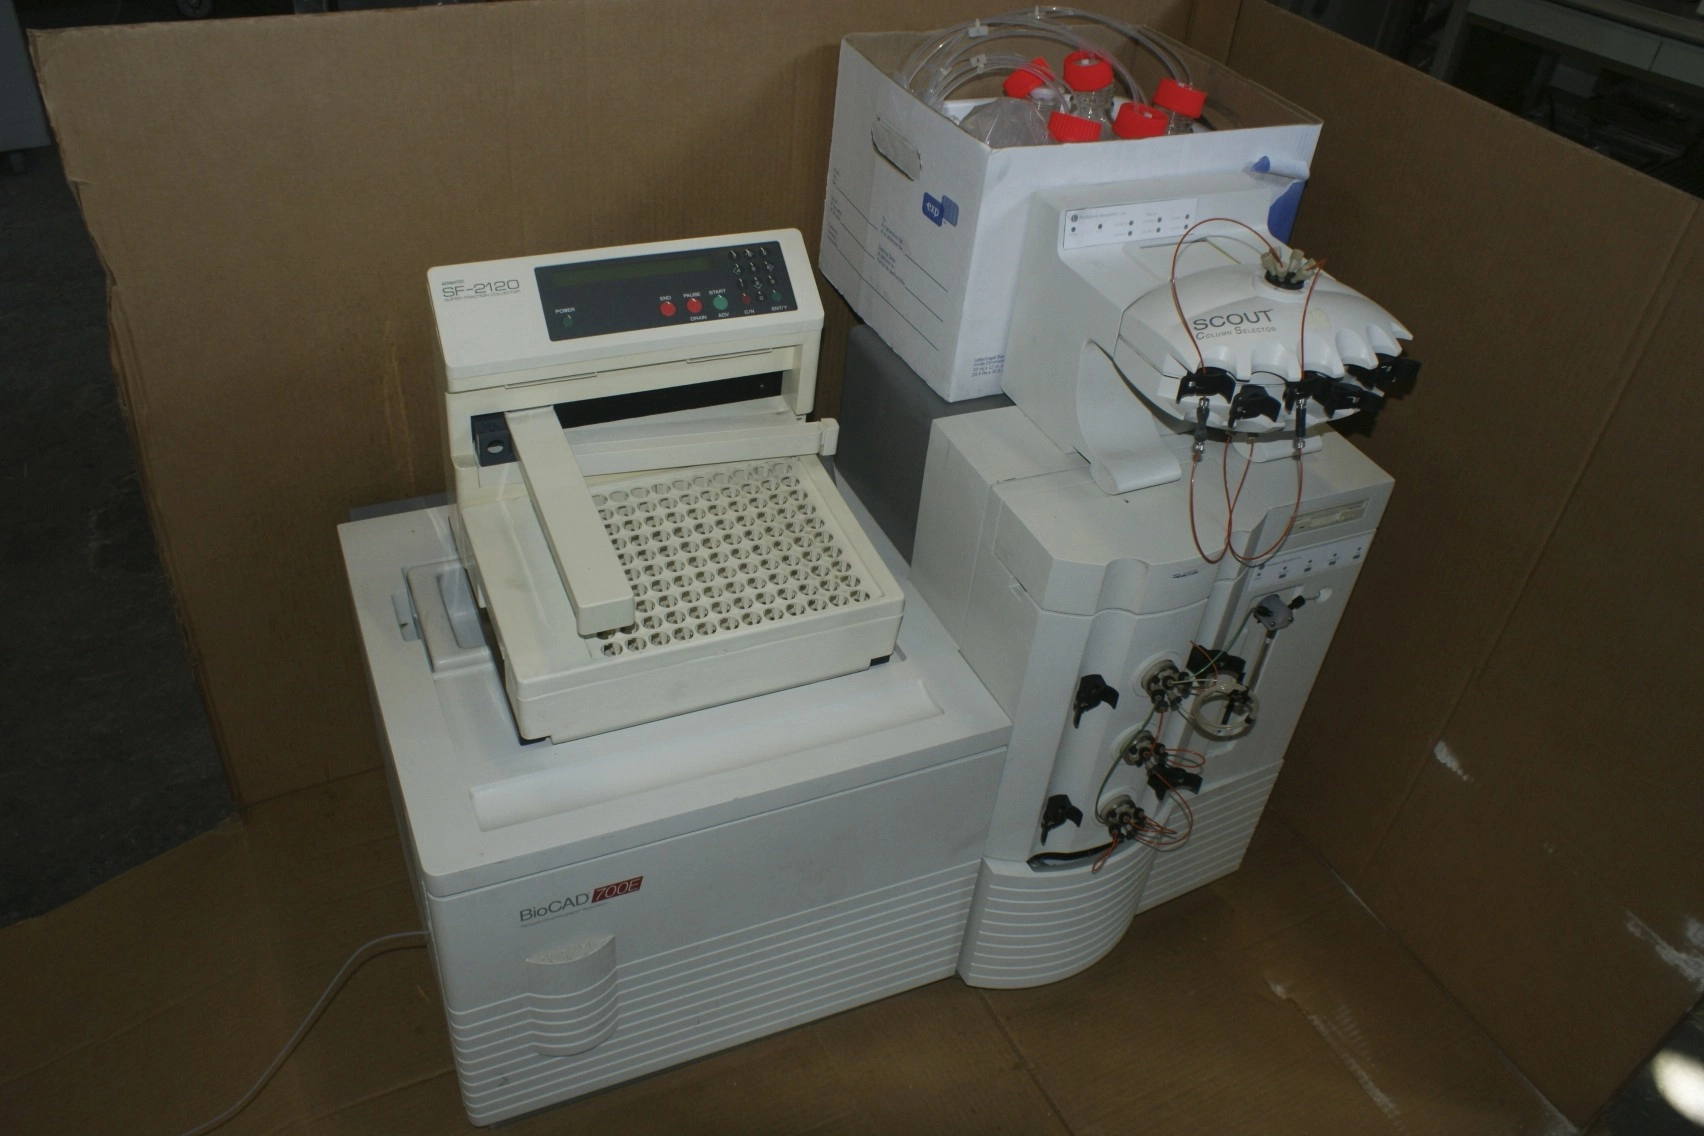 Perseptive Biosystems Biocad BIOCAD Perfusion 700E Perfusion Prep HPLC Systems Biocad 700E Biocad Perfusion System used nice